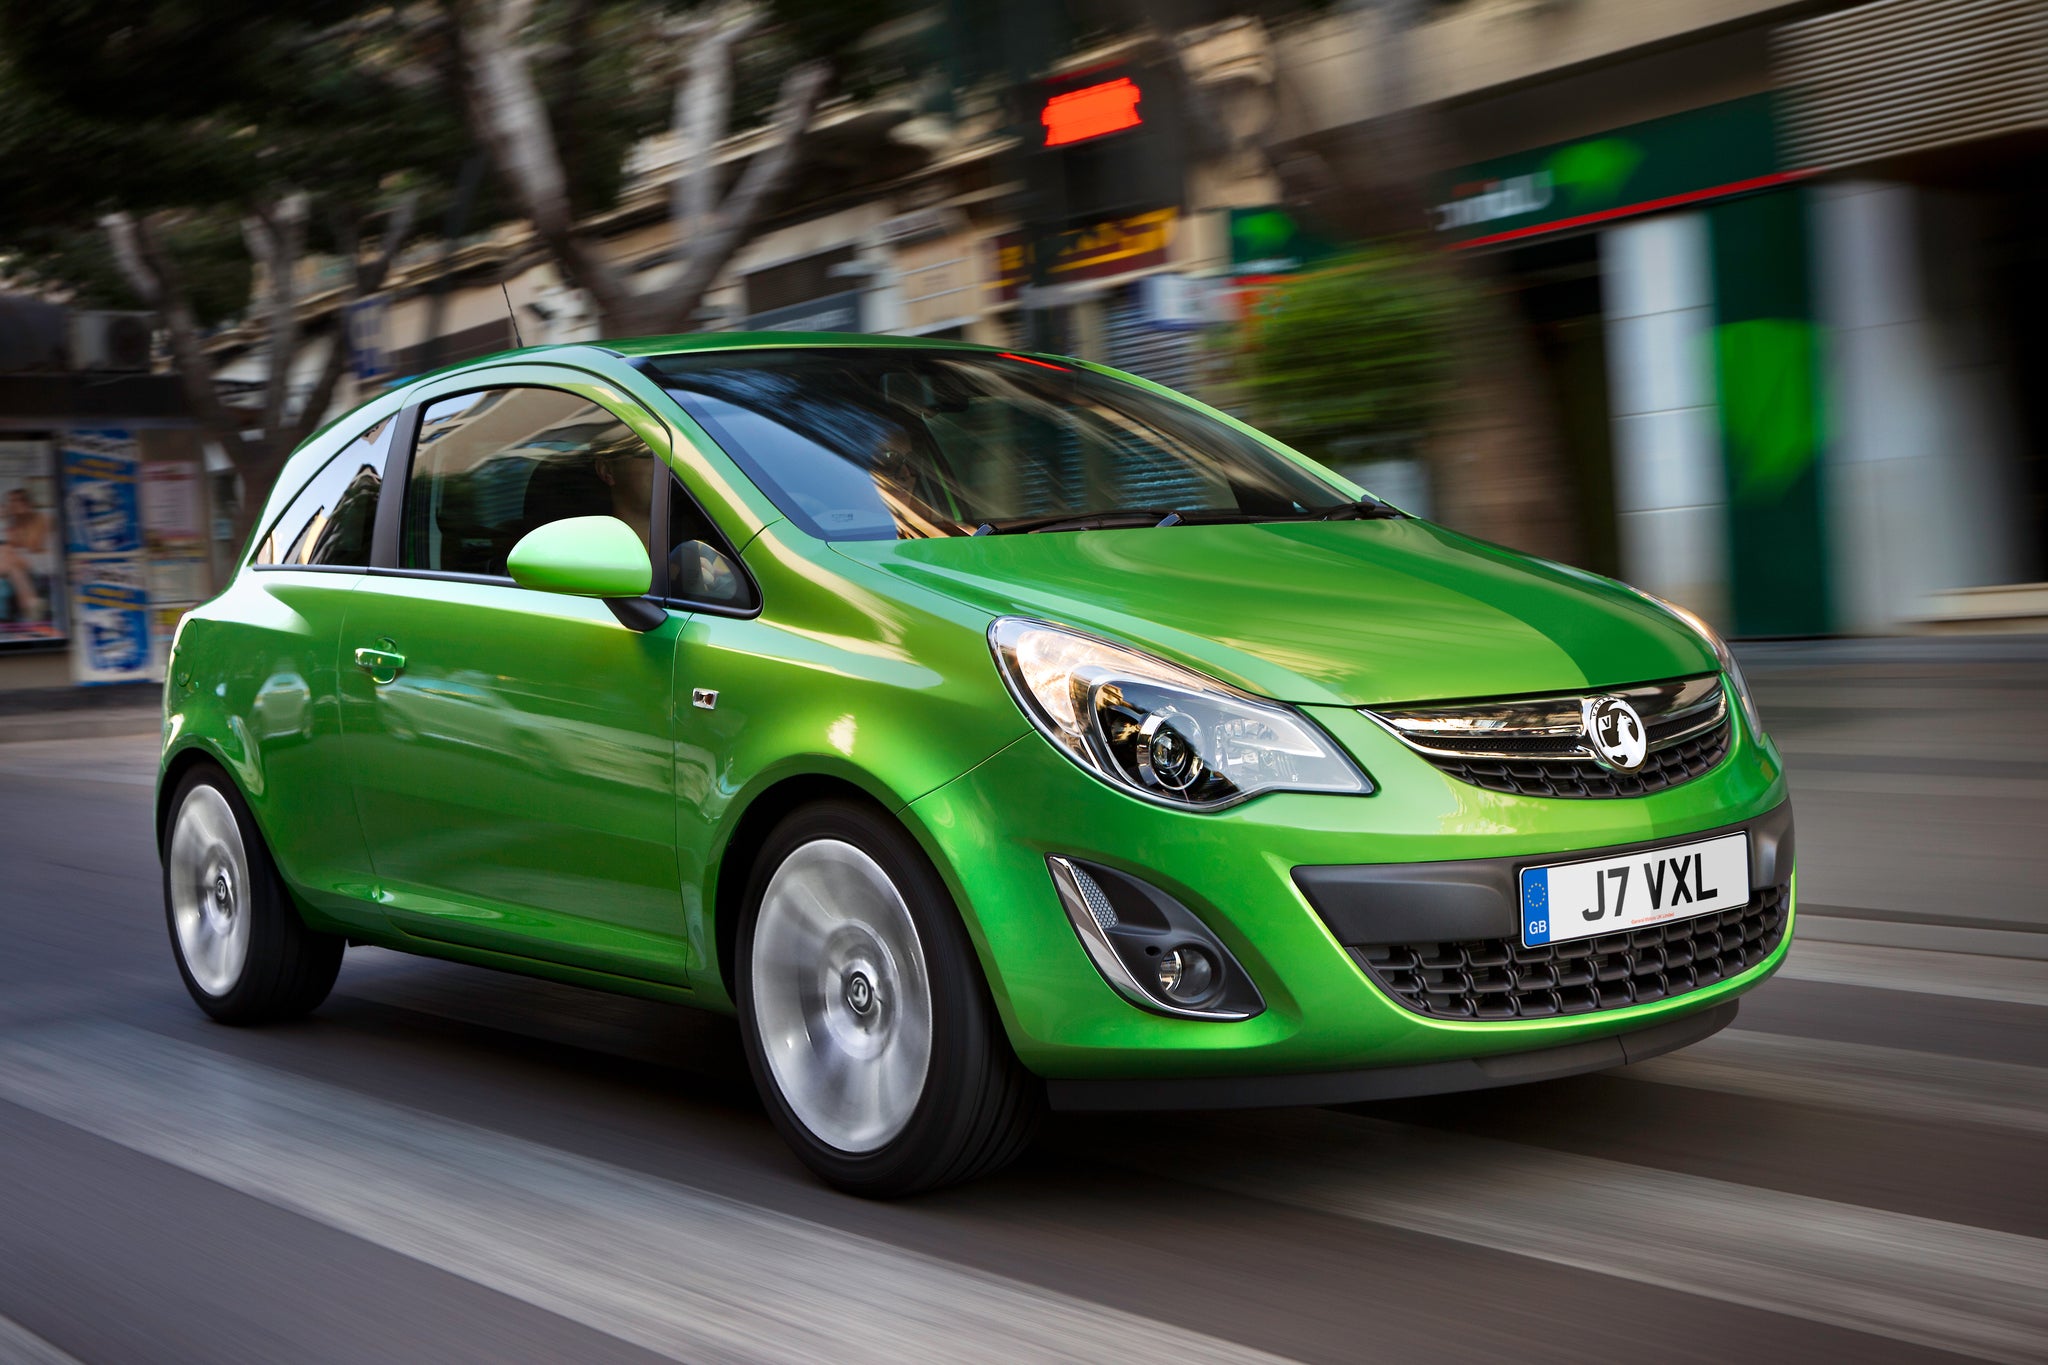 The Vauxhall Corsa was the third highest-selling car of 2014